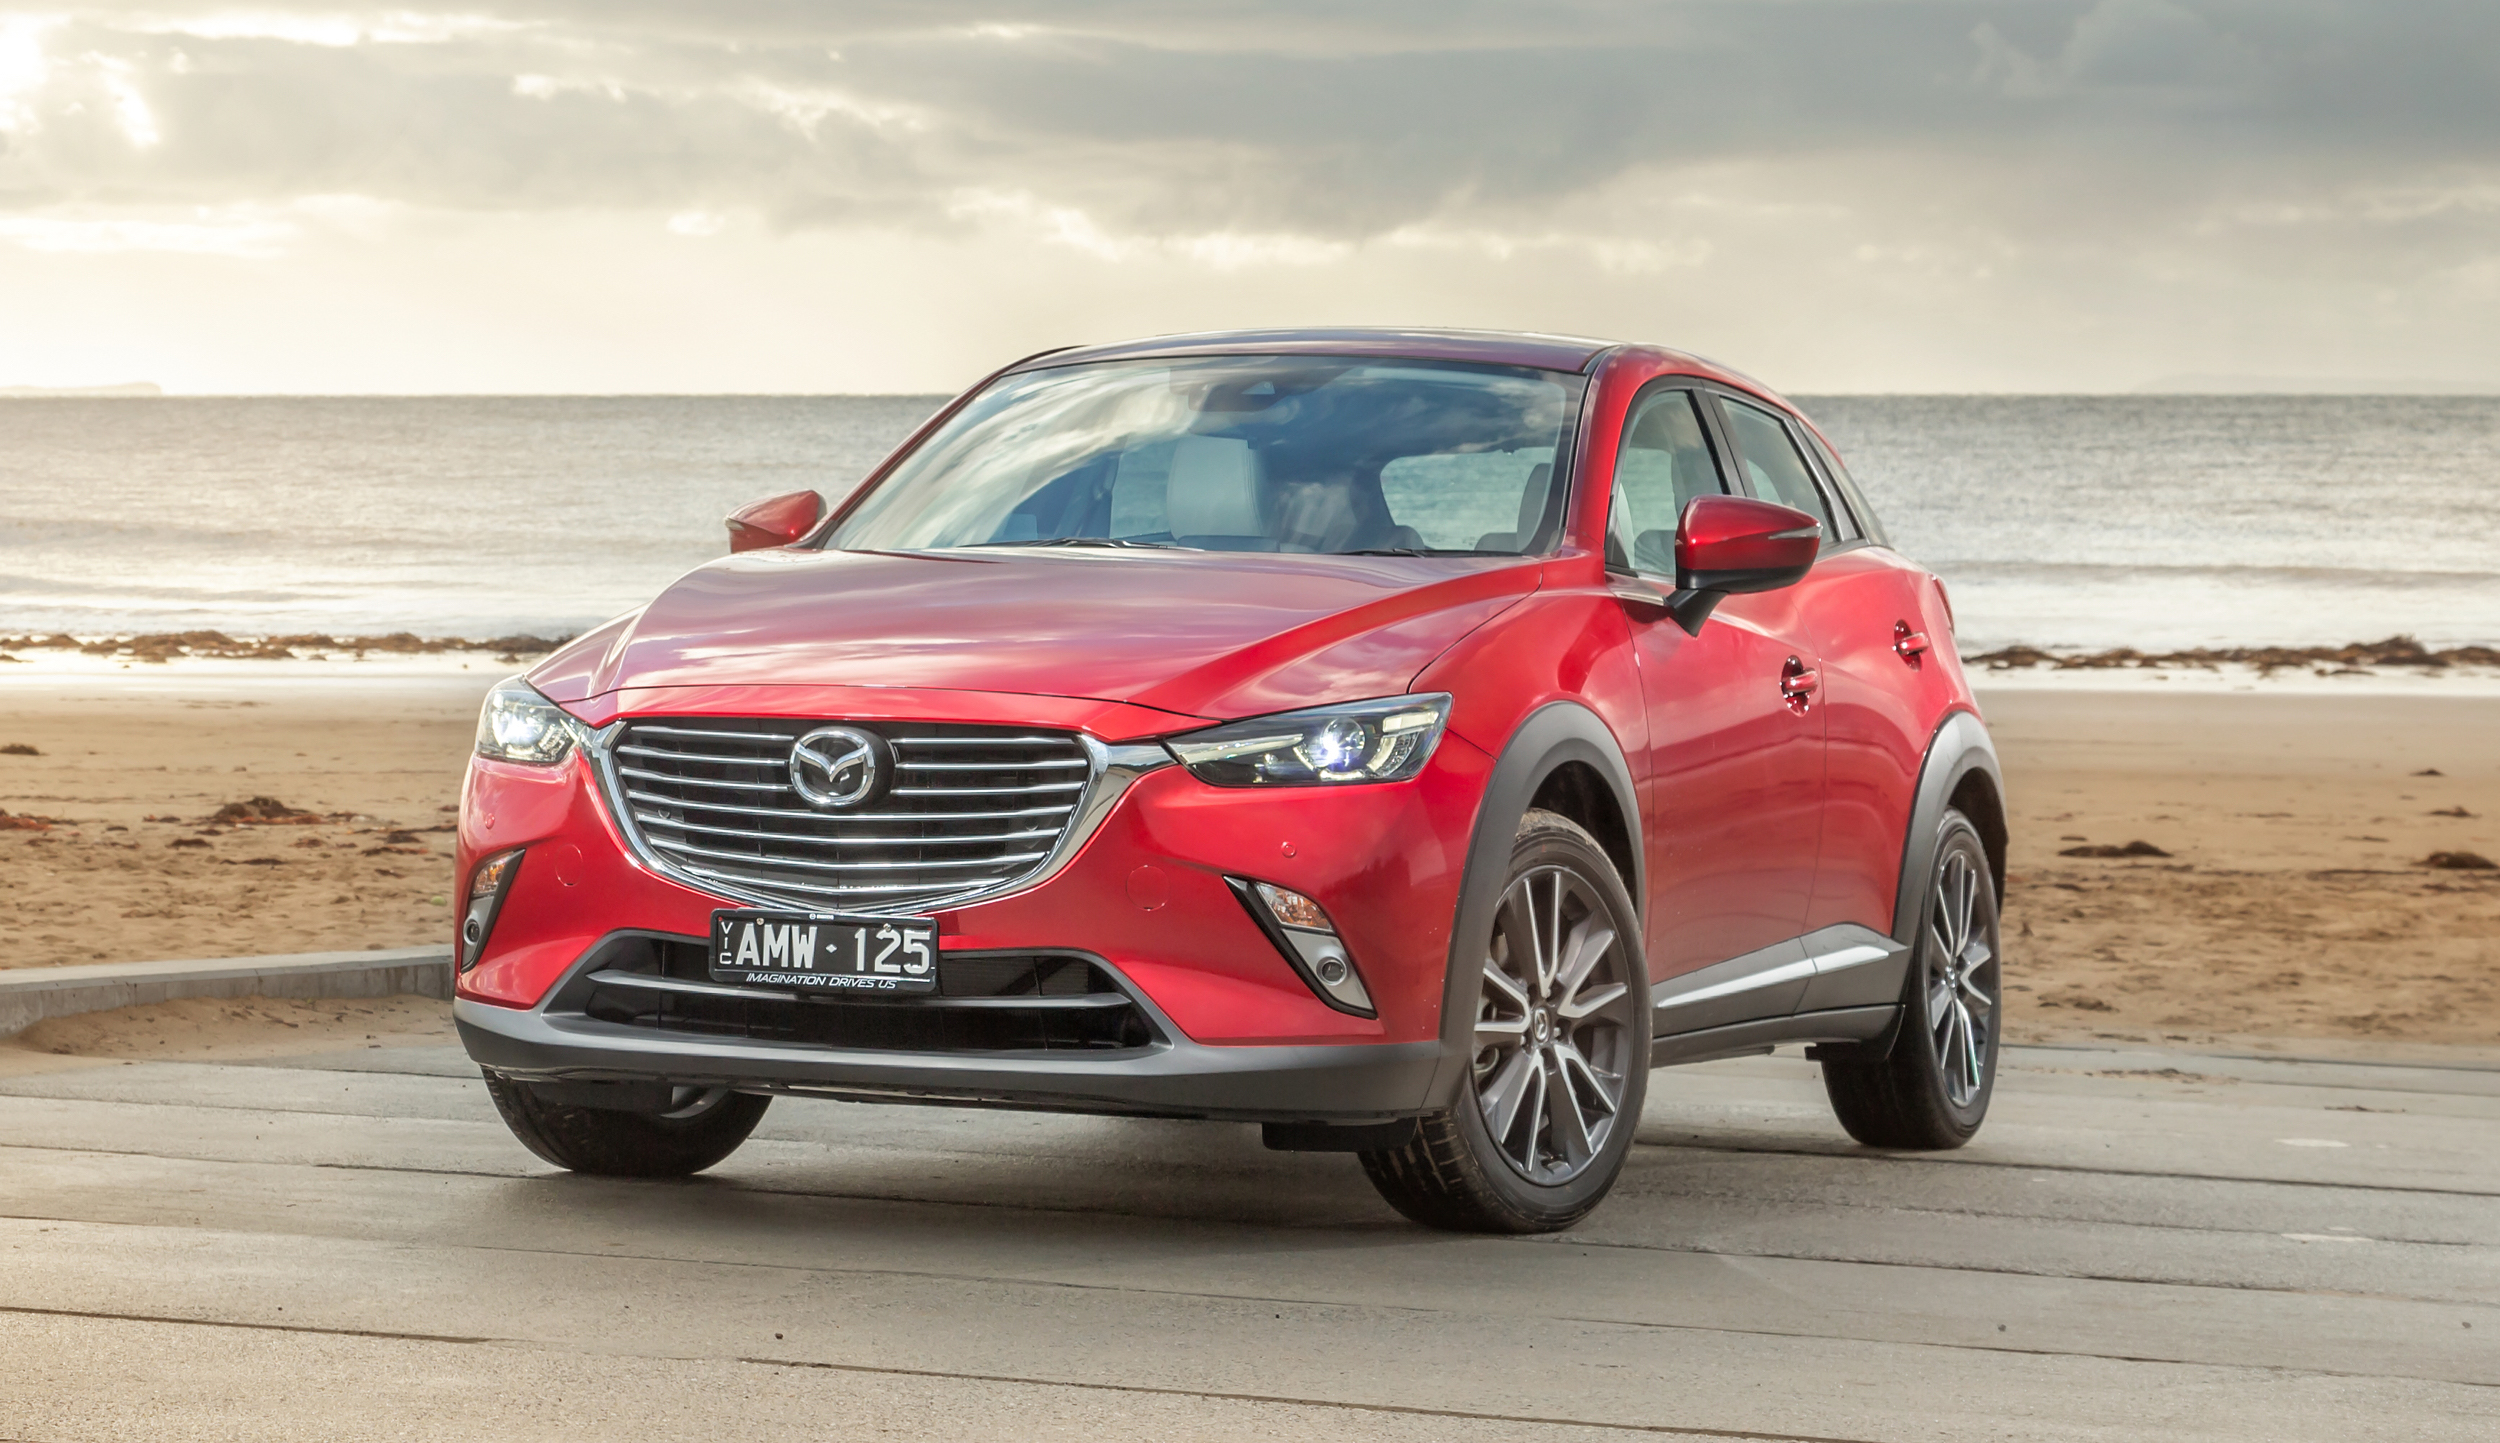 2017 Mazda CX-3 pricing and specs - Photos (1 of 11)